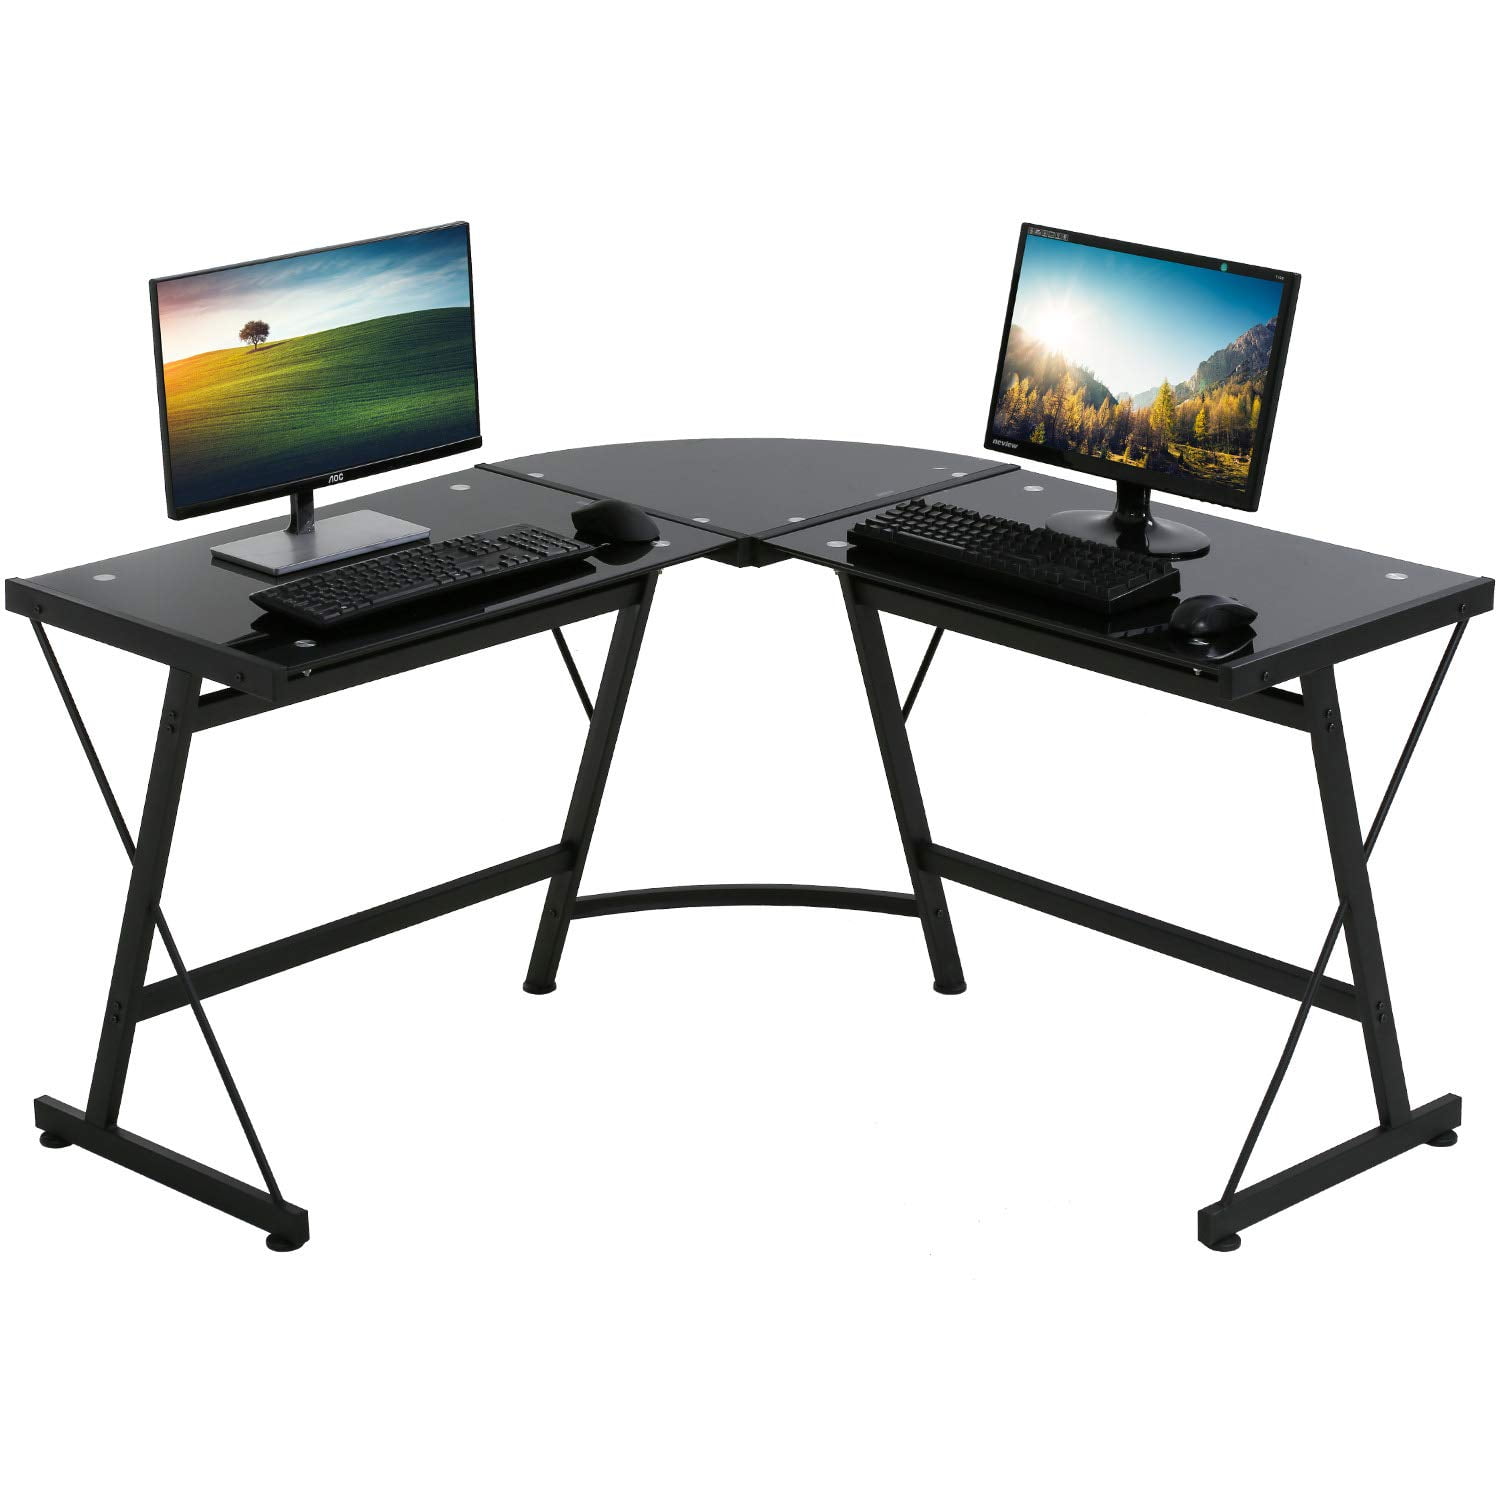 Featured image of post Modern Executive Home Office Desk / Buy modern high end executive office desks online.